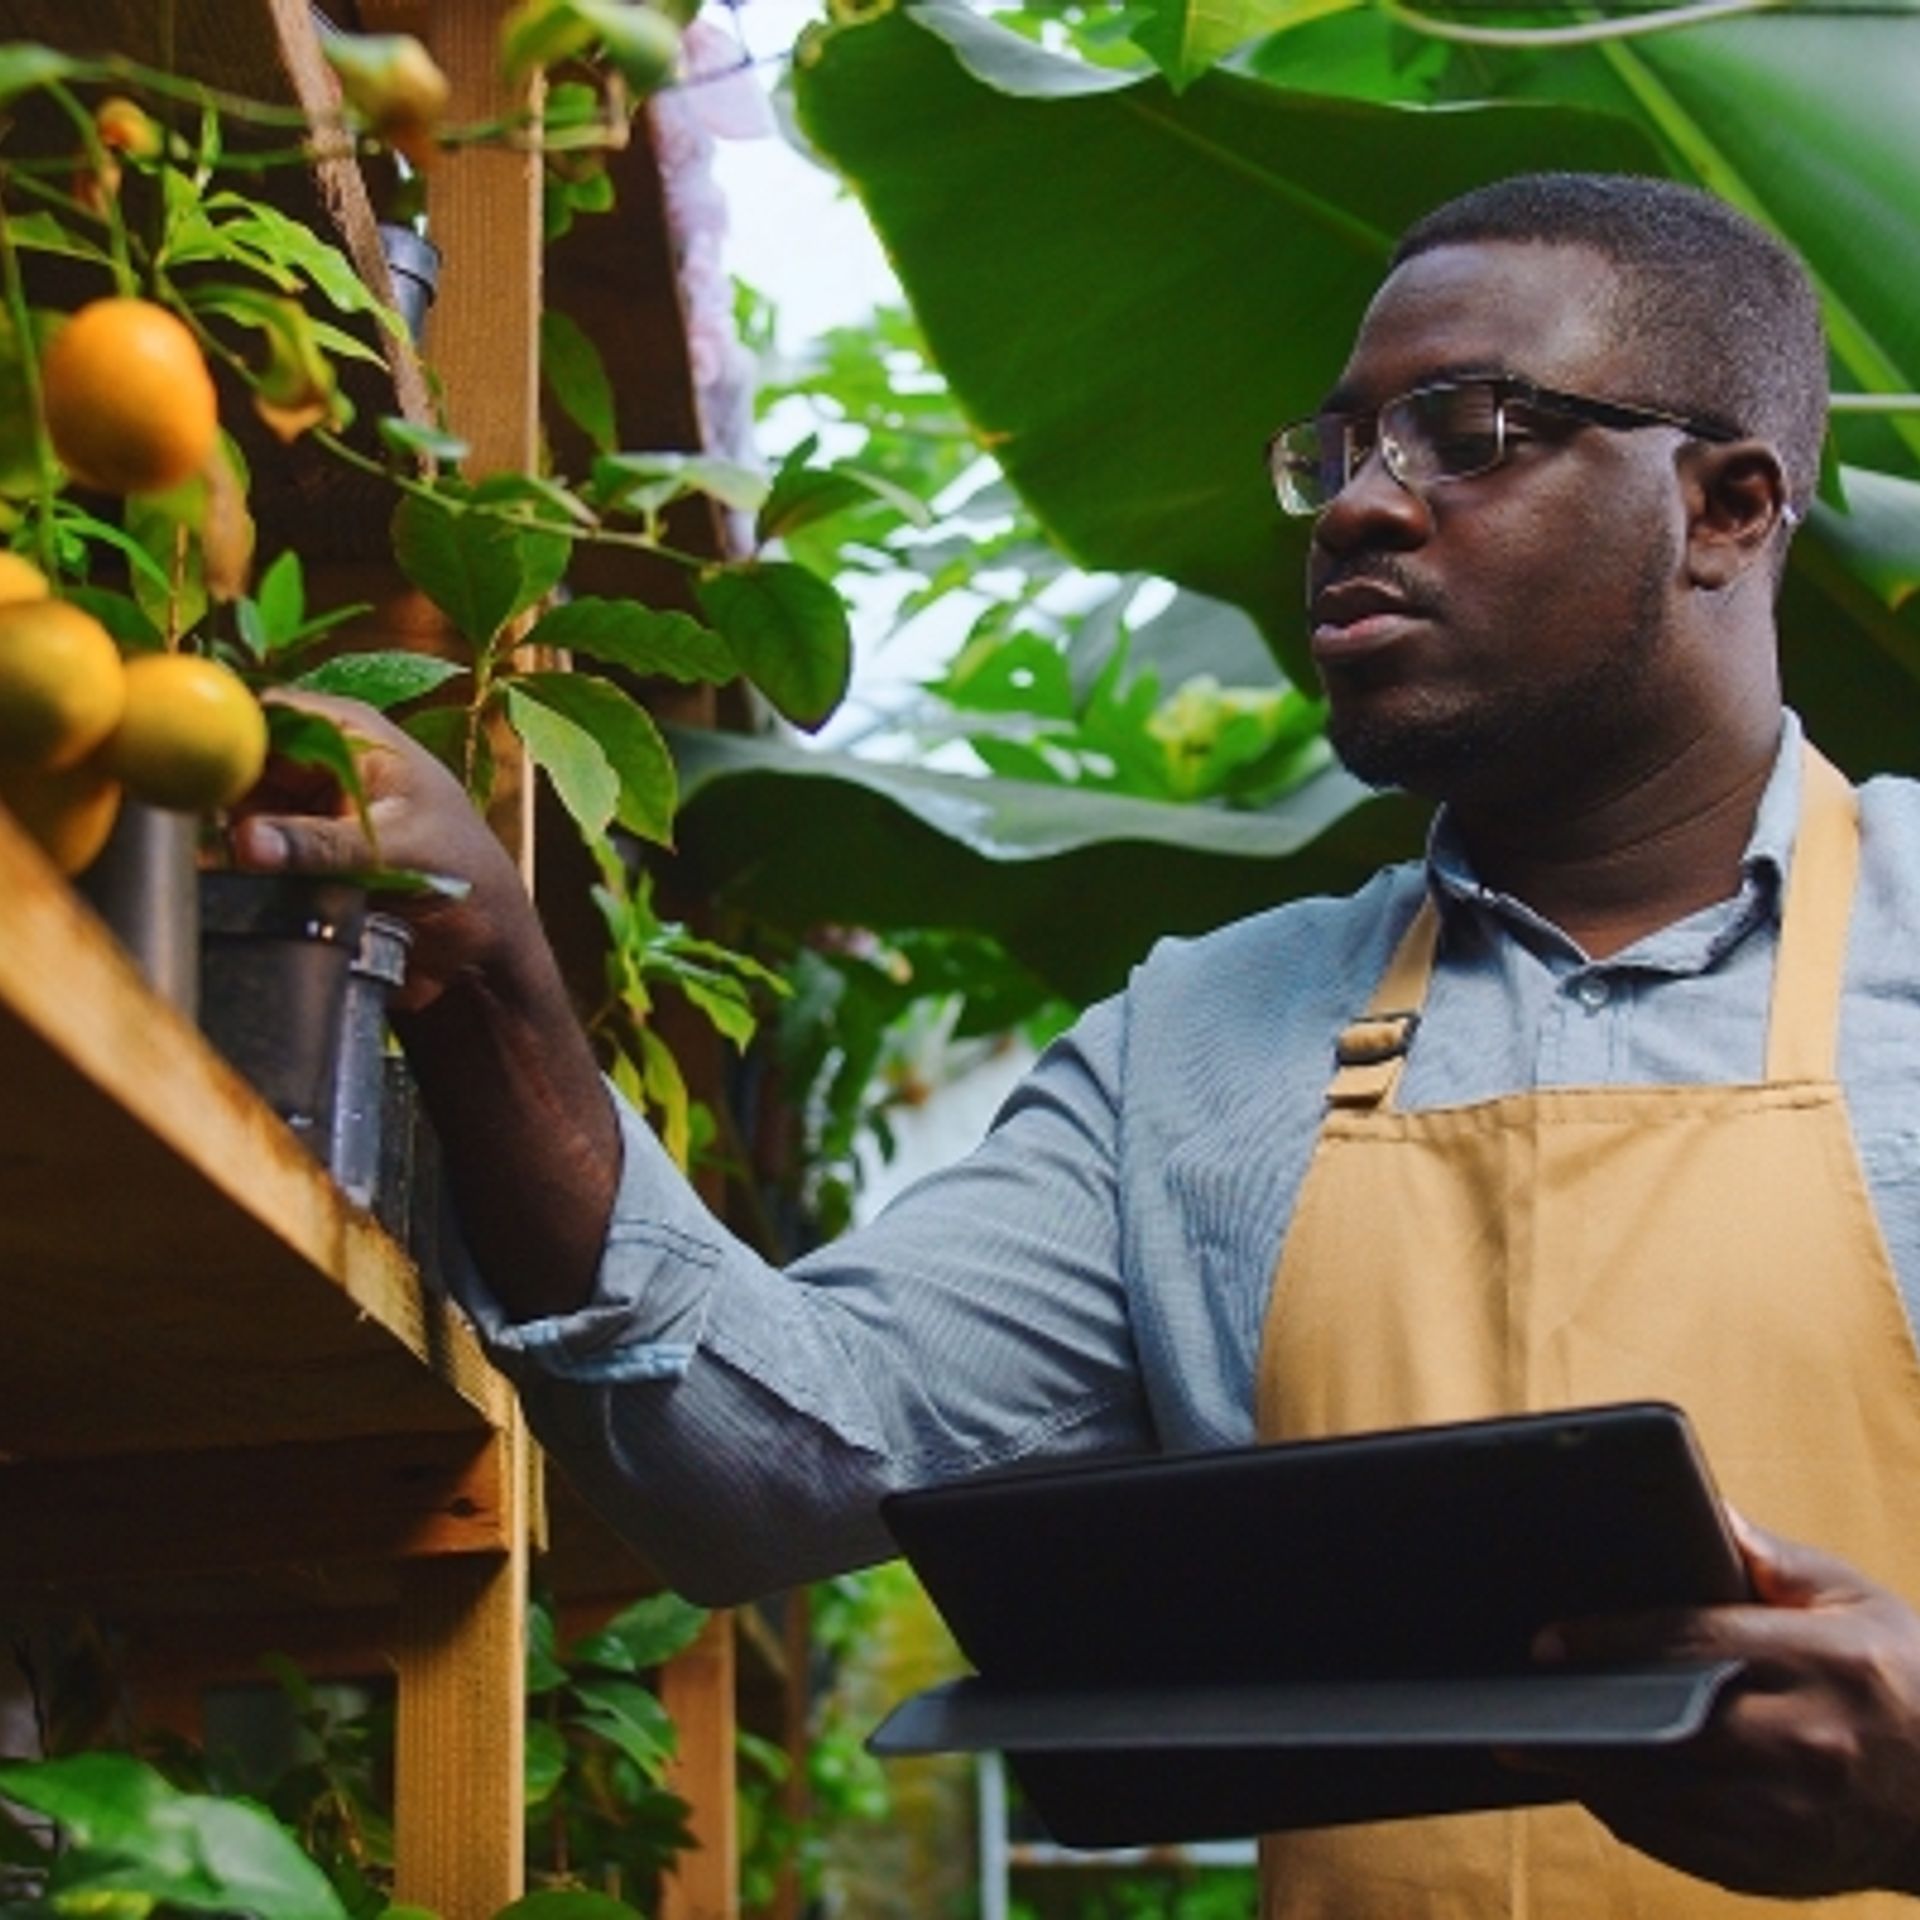 Image of a certification body auditor conducting an audit of citrus plants